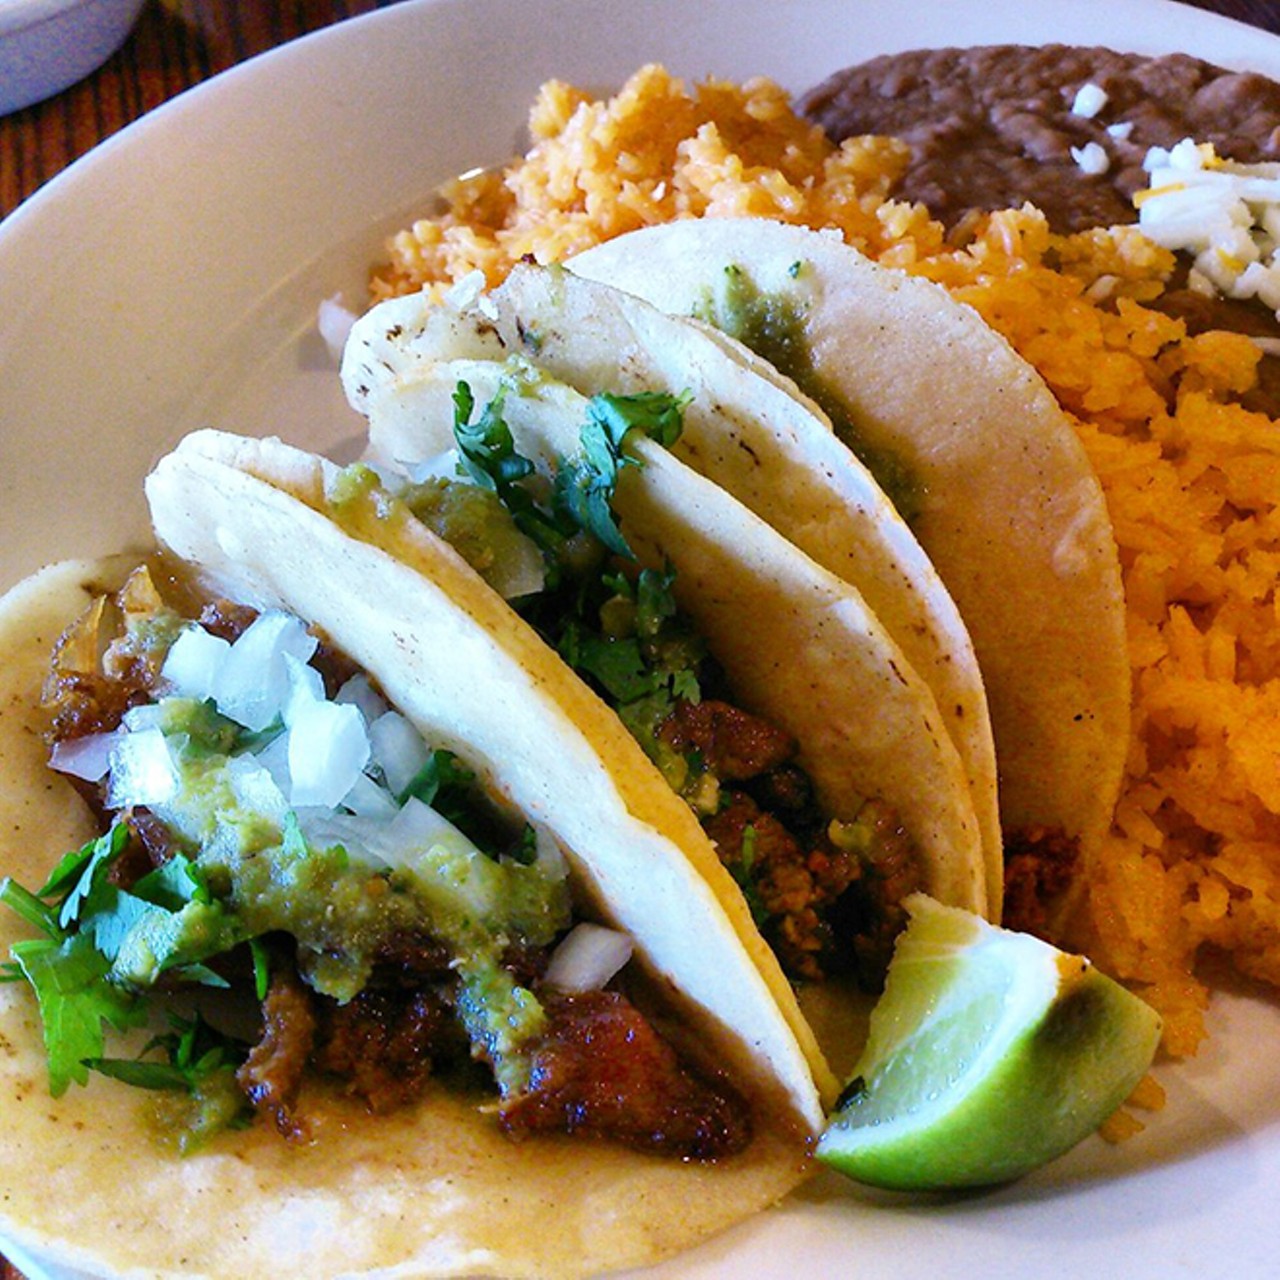 Border Grill
5695-A Vineland Road, 407-352-0101
To add some interesting flavor to their al pastor tacos (marinated pork), Border Grill puts some cilantro and onion. Each meal comes with a healthy dosage of rice and beans, so show up hungry.
Photo via Yelp